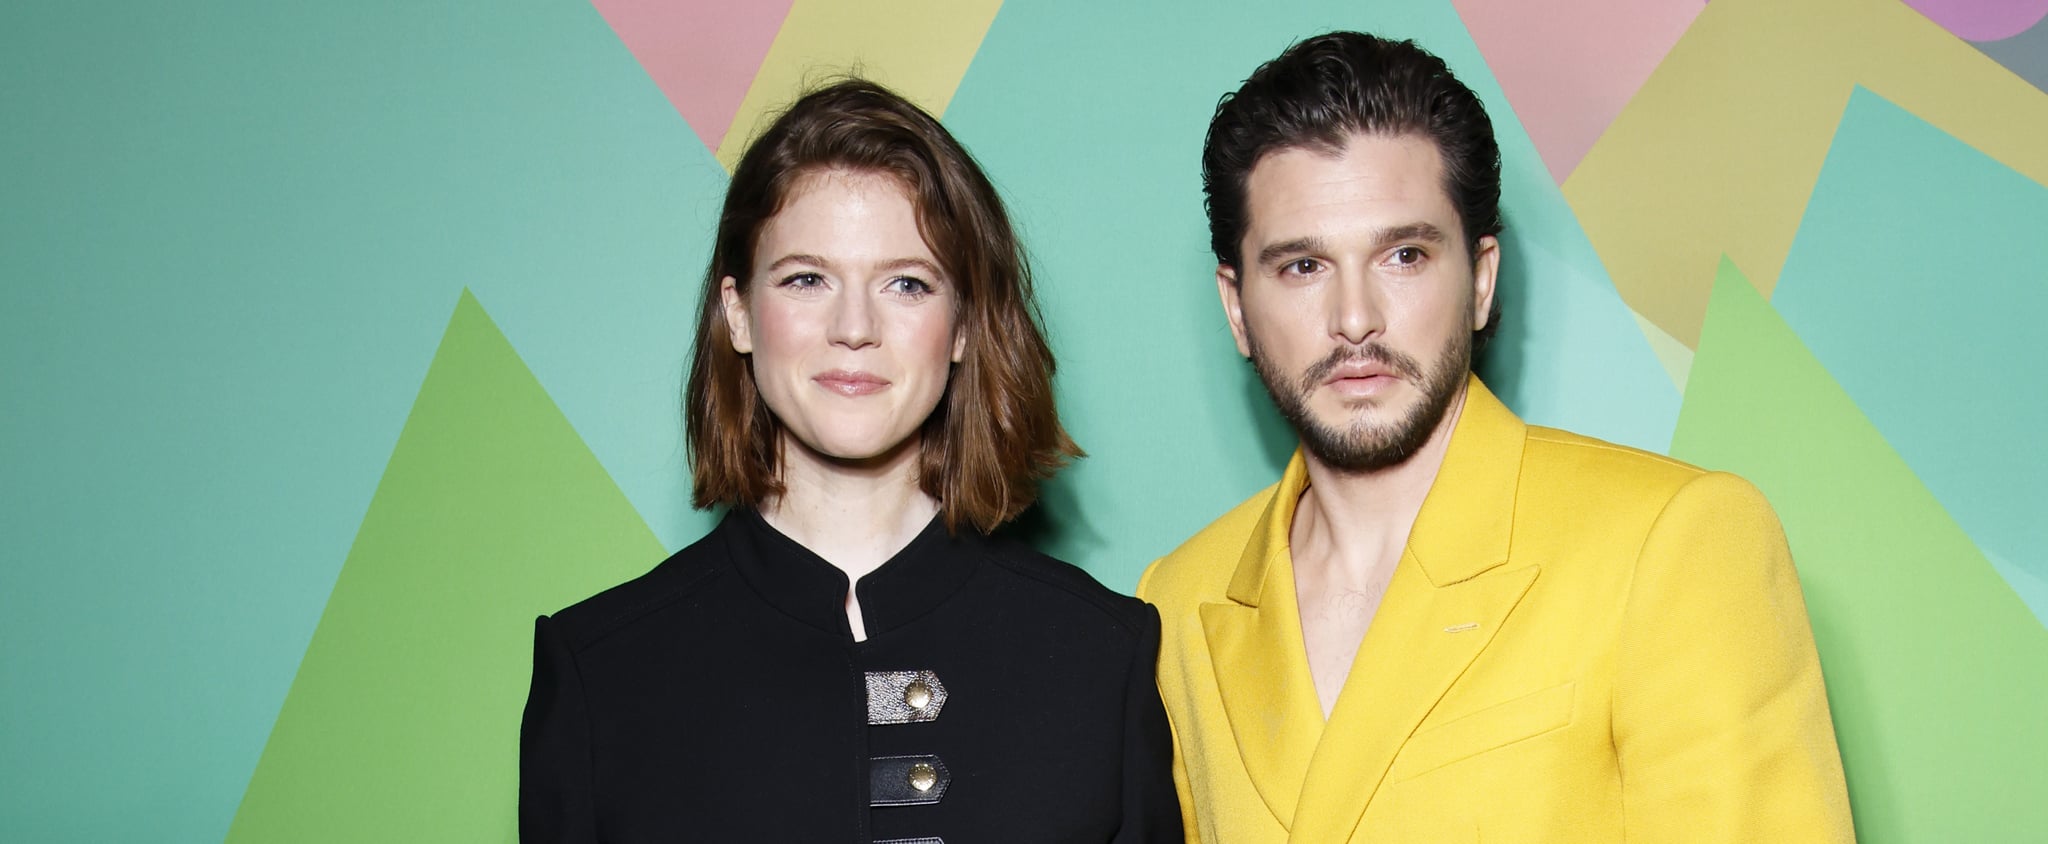 Kit Harington and Rose Leslie Are Expecting Baby No. 2